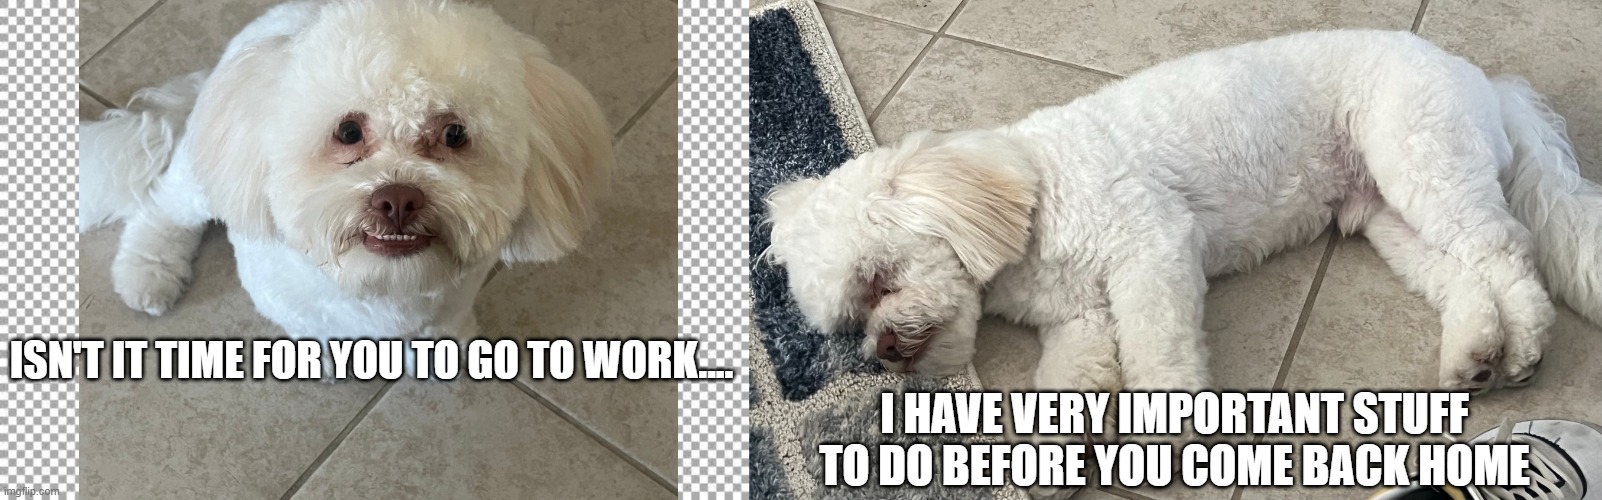 What My Pet Thinks Monday-Friday | ISN'T IT TIME FOR YOU TO GO TO WORK.... I HAVE VERY IMPORTANT STUFF TO DO BEFORE YOU COME BACK HOME | image tagged in free | made w/ Imgflip meme maker